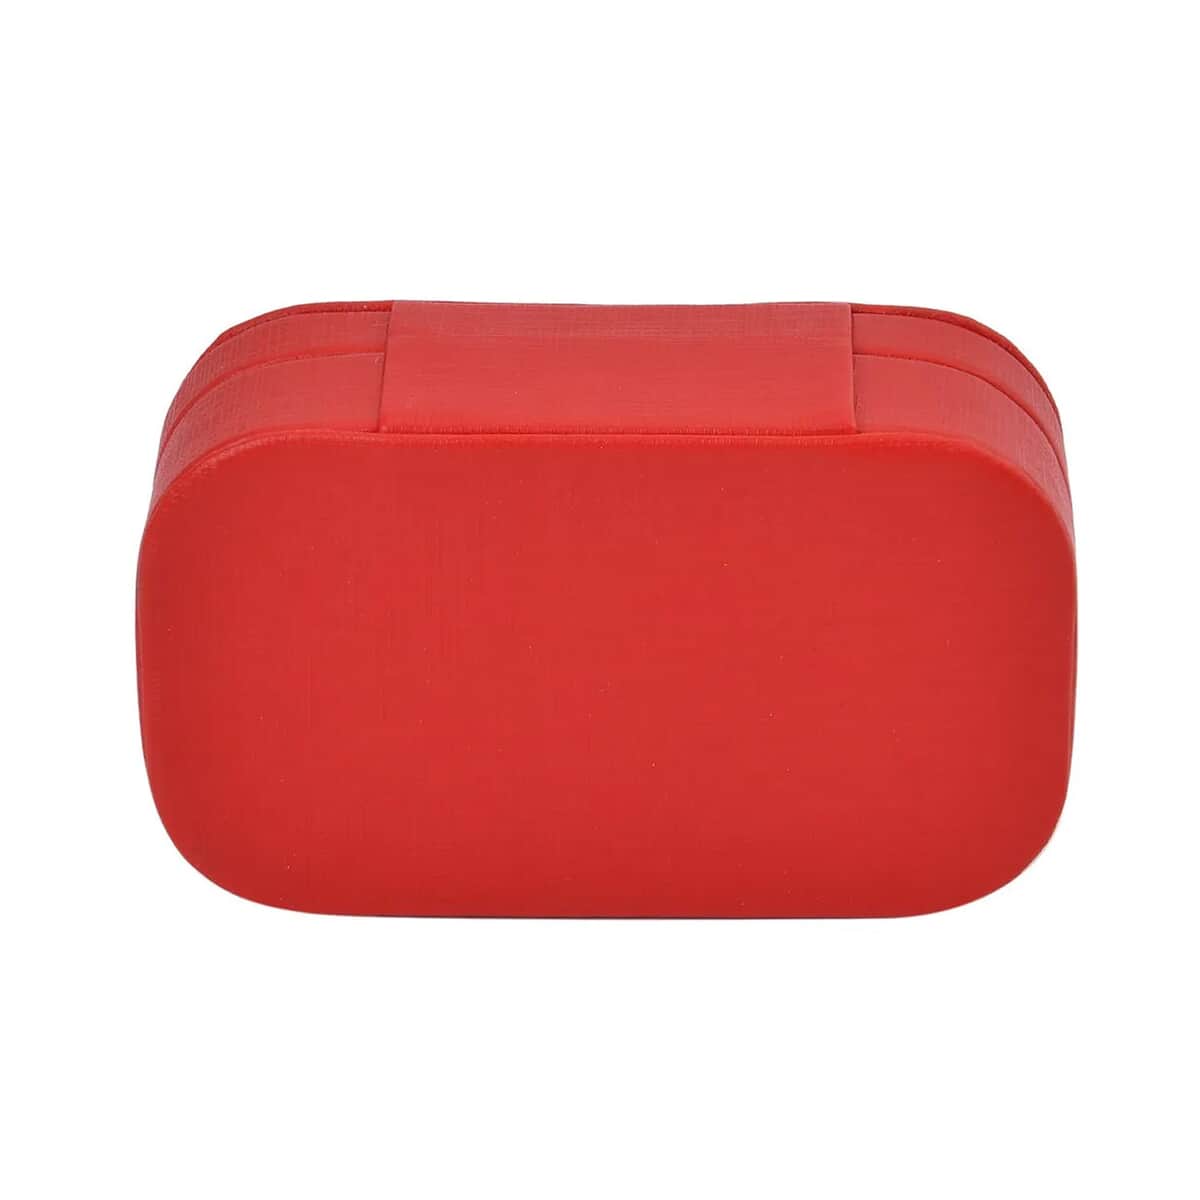 Red Faux Leather Oval Shape Jewelry Box (4 Necklace Hooks, Pouch Pocket, 4 Ring Slot) image number 5